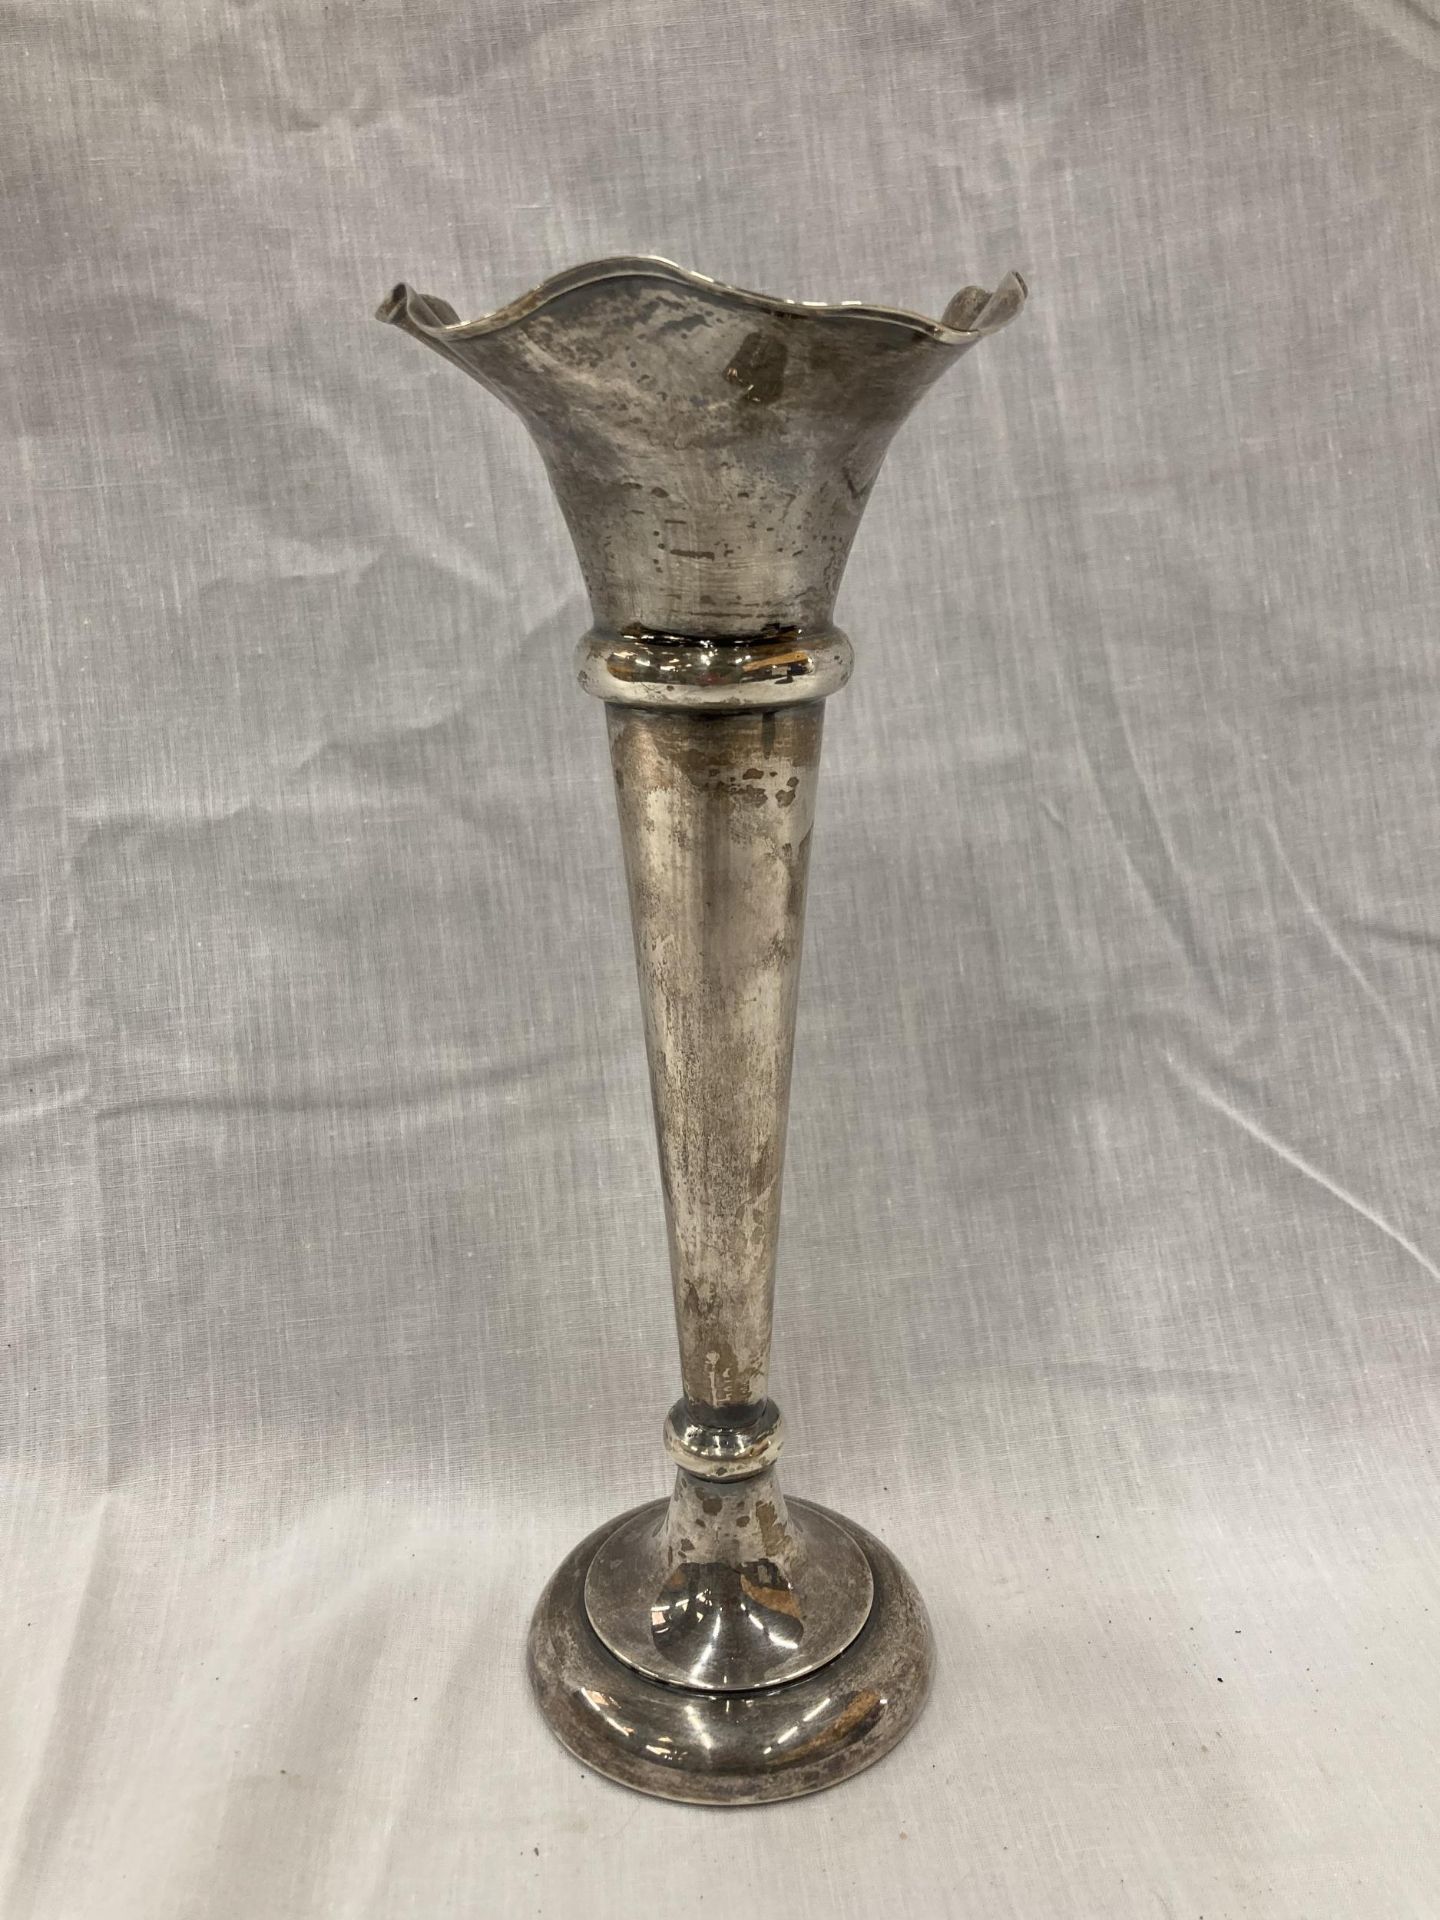 A HALLMARKED BIRMINGHAM SILVER BUD VASE WITH WEIGHTED BASE HEIGHT 25CM GROSS WEIGHT 355.9 GRAMS